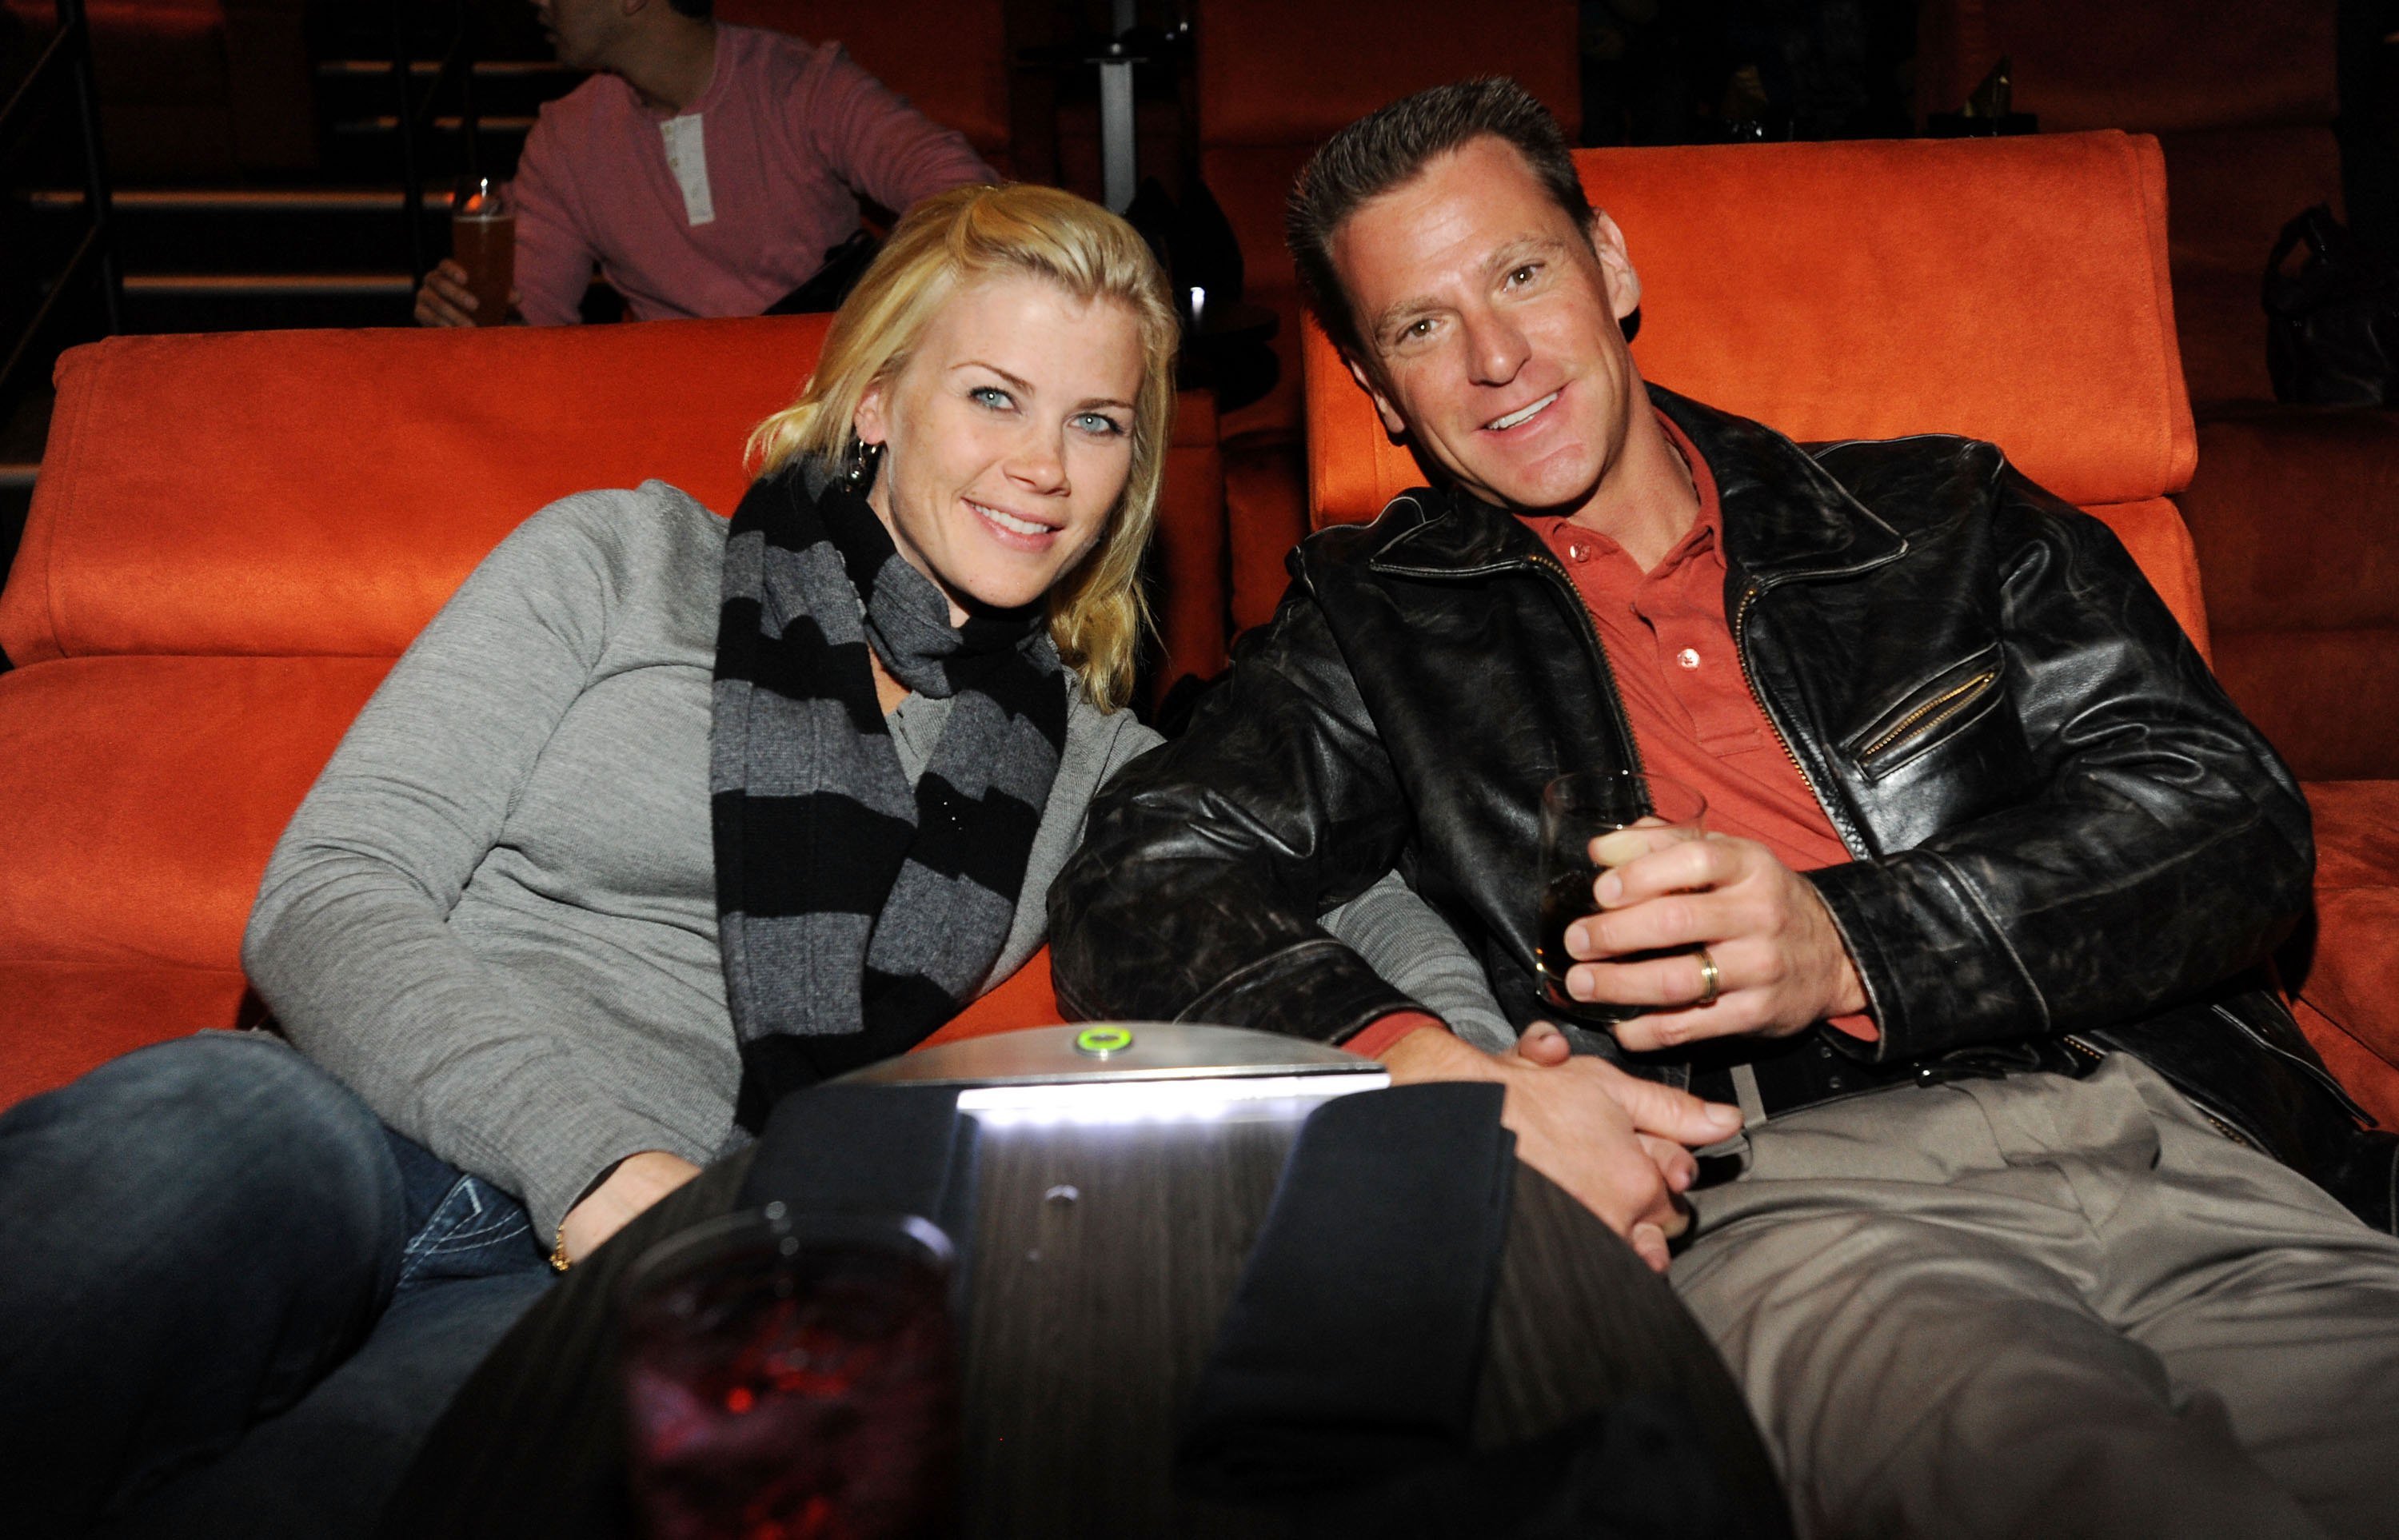 Actress Alison Sweeney and her husband Dave Sanov on December 6, 2009 in Pasadena, California | Source: Getty Images